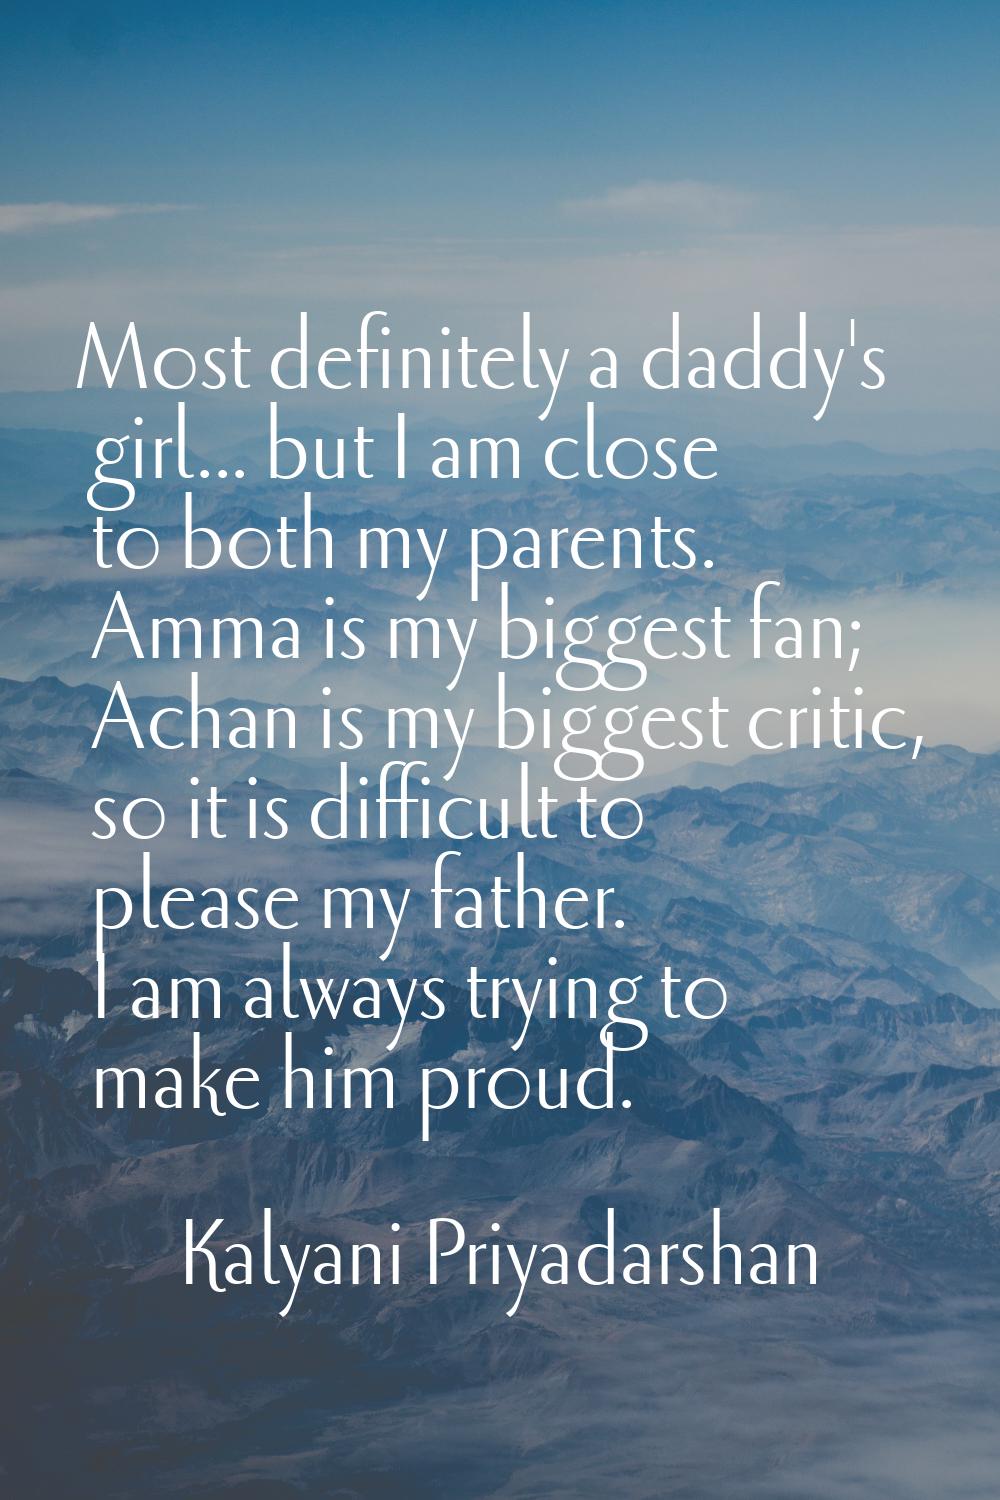 Most definitely a daddy's girl... but I am close to both my parents. Amma is my biggest fan; Achan 